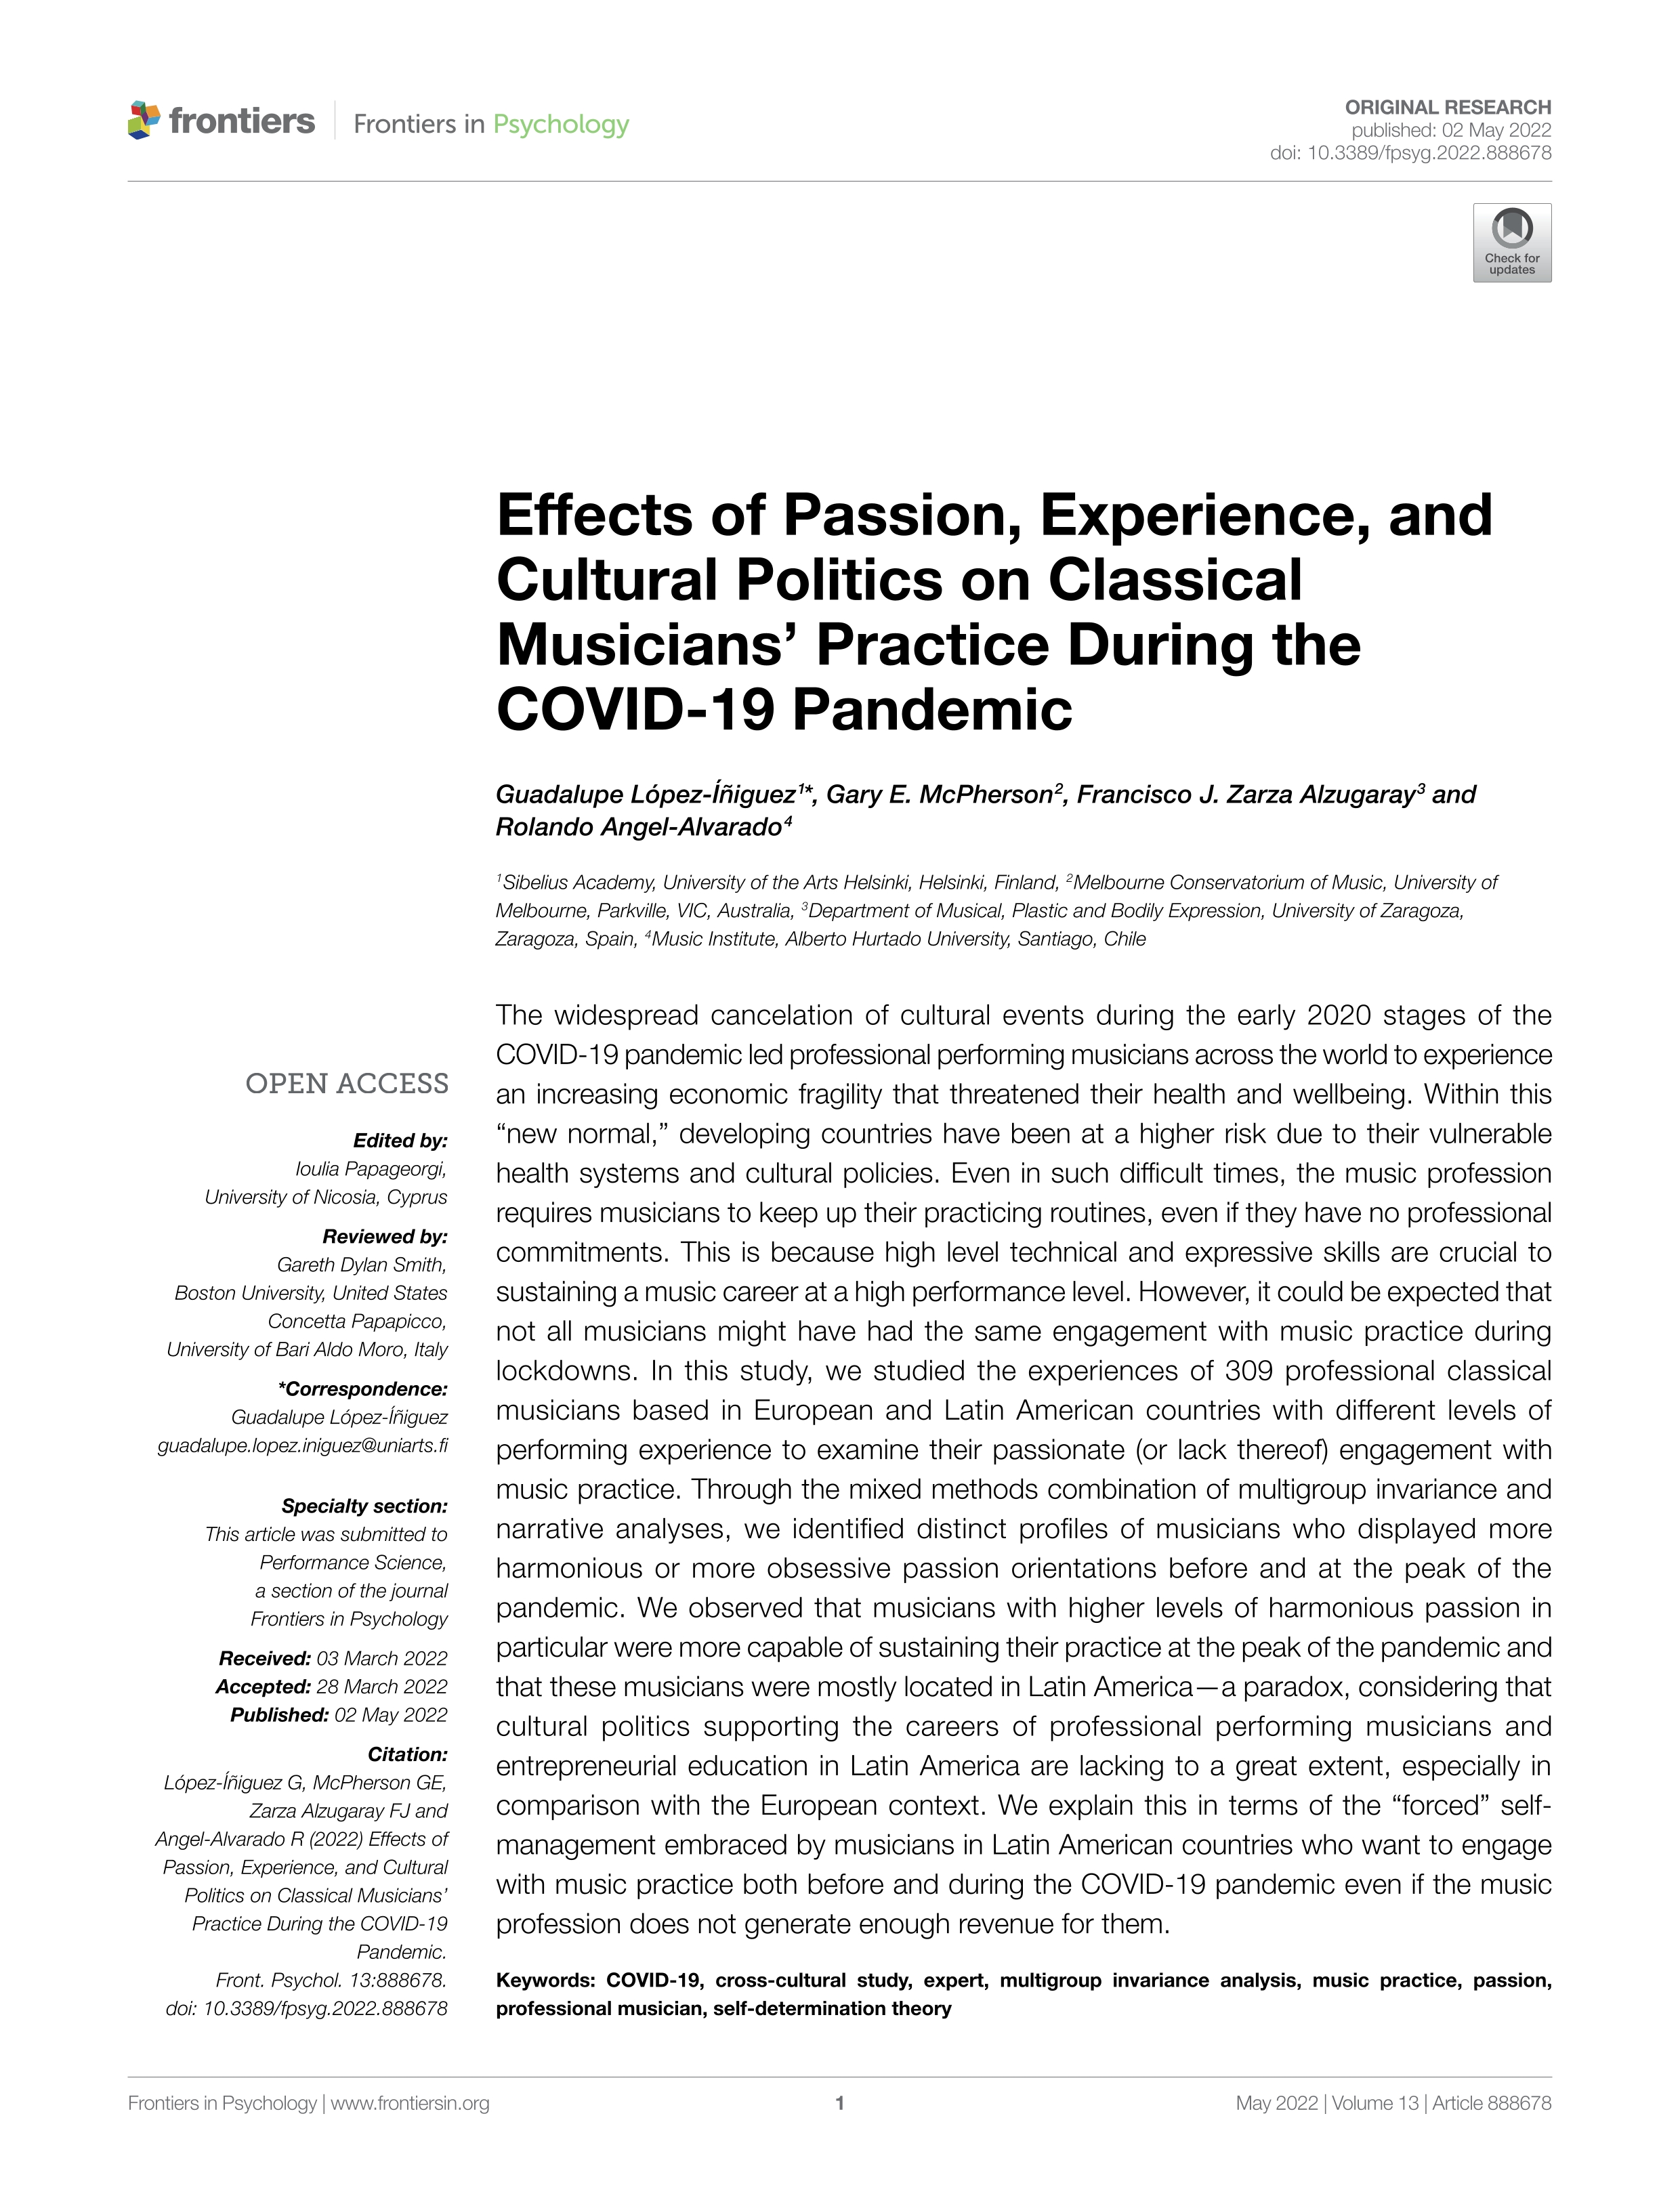 Effects of passion, experience, and cultural politics on classical musicians’ practice during the COVID-19 pandemic